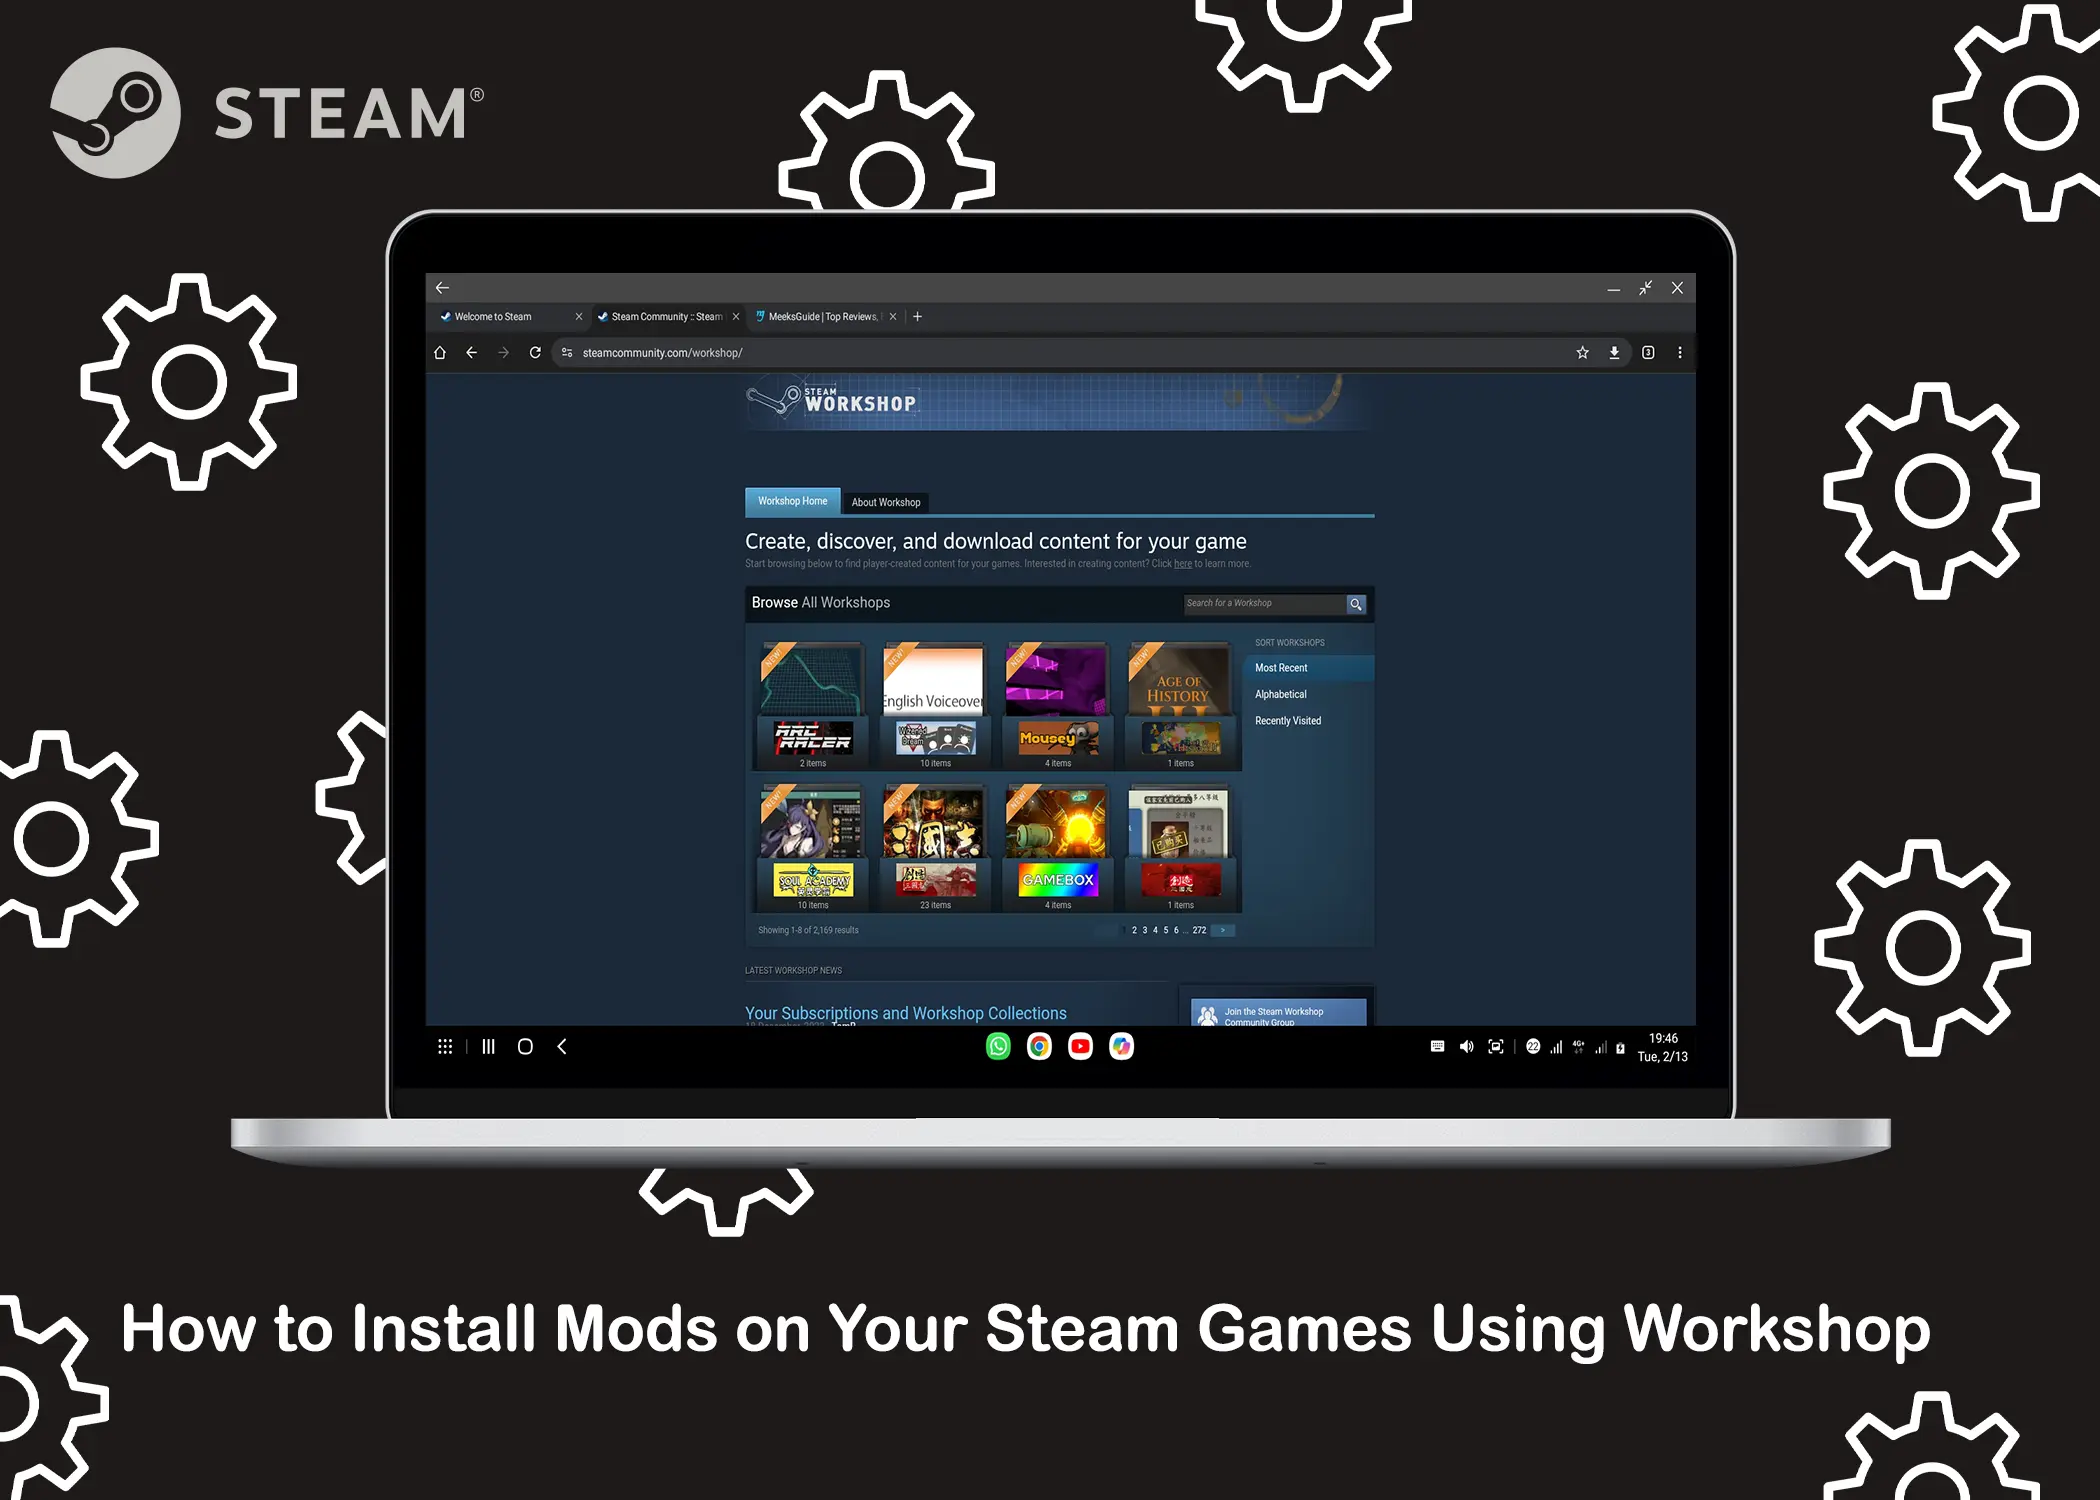 How to Install Mods on Your Steam Games Using Workshop